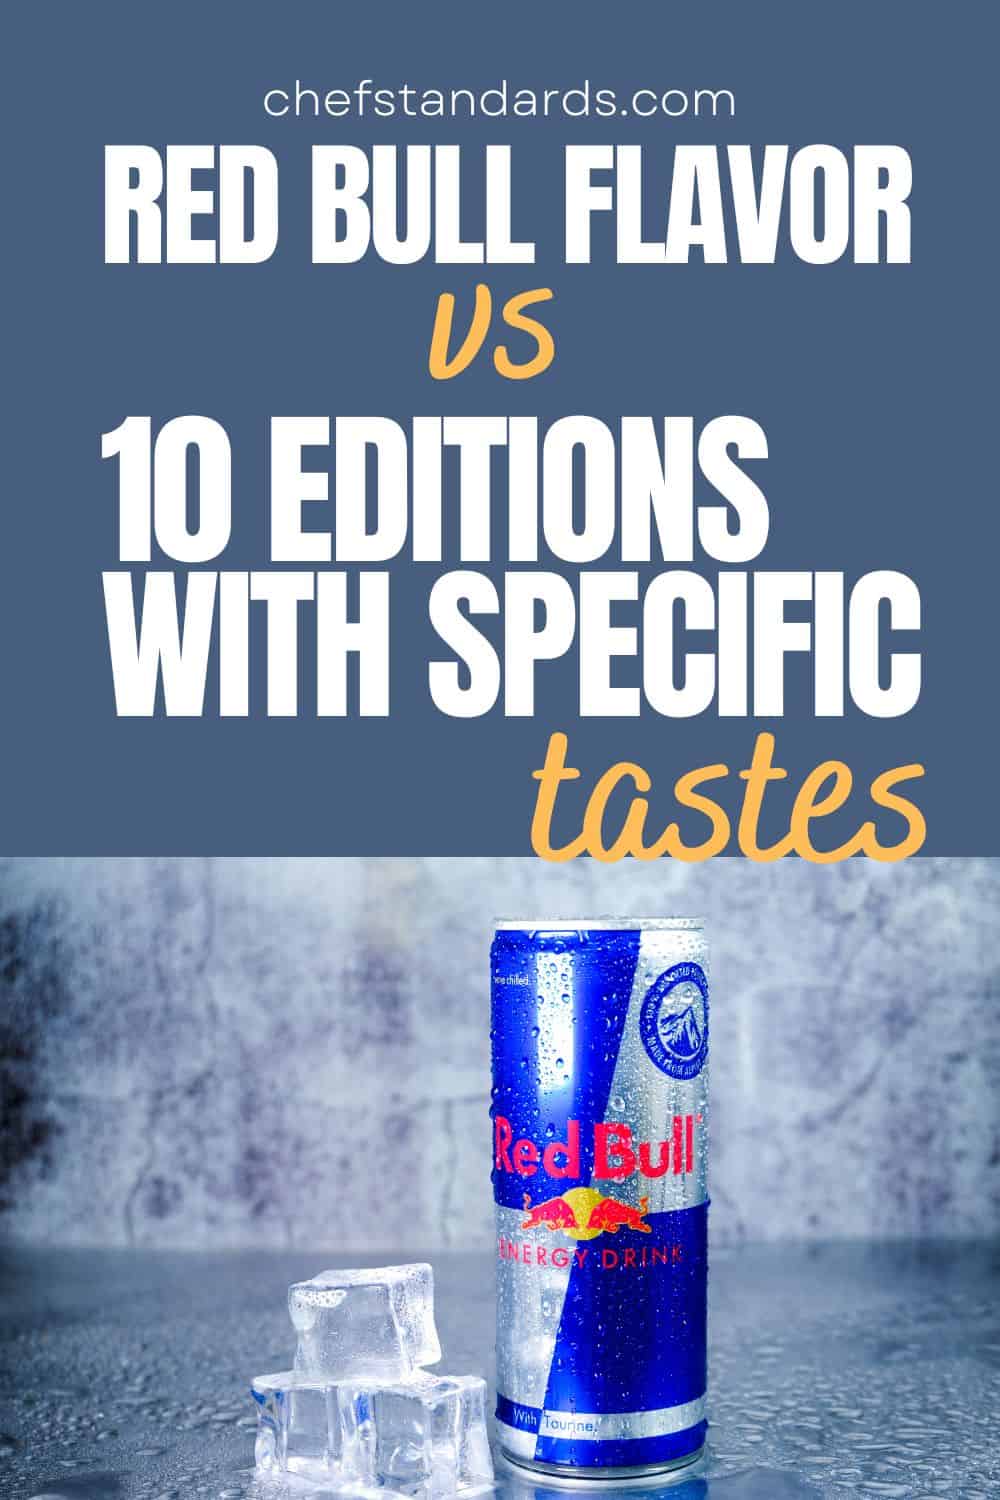 What Does Red Bull Taste Like 10 Editions With Specific Tastes
